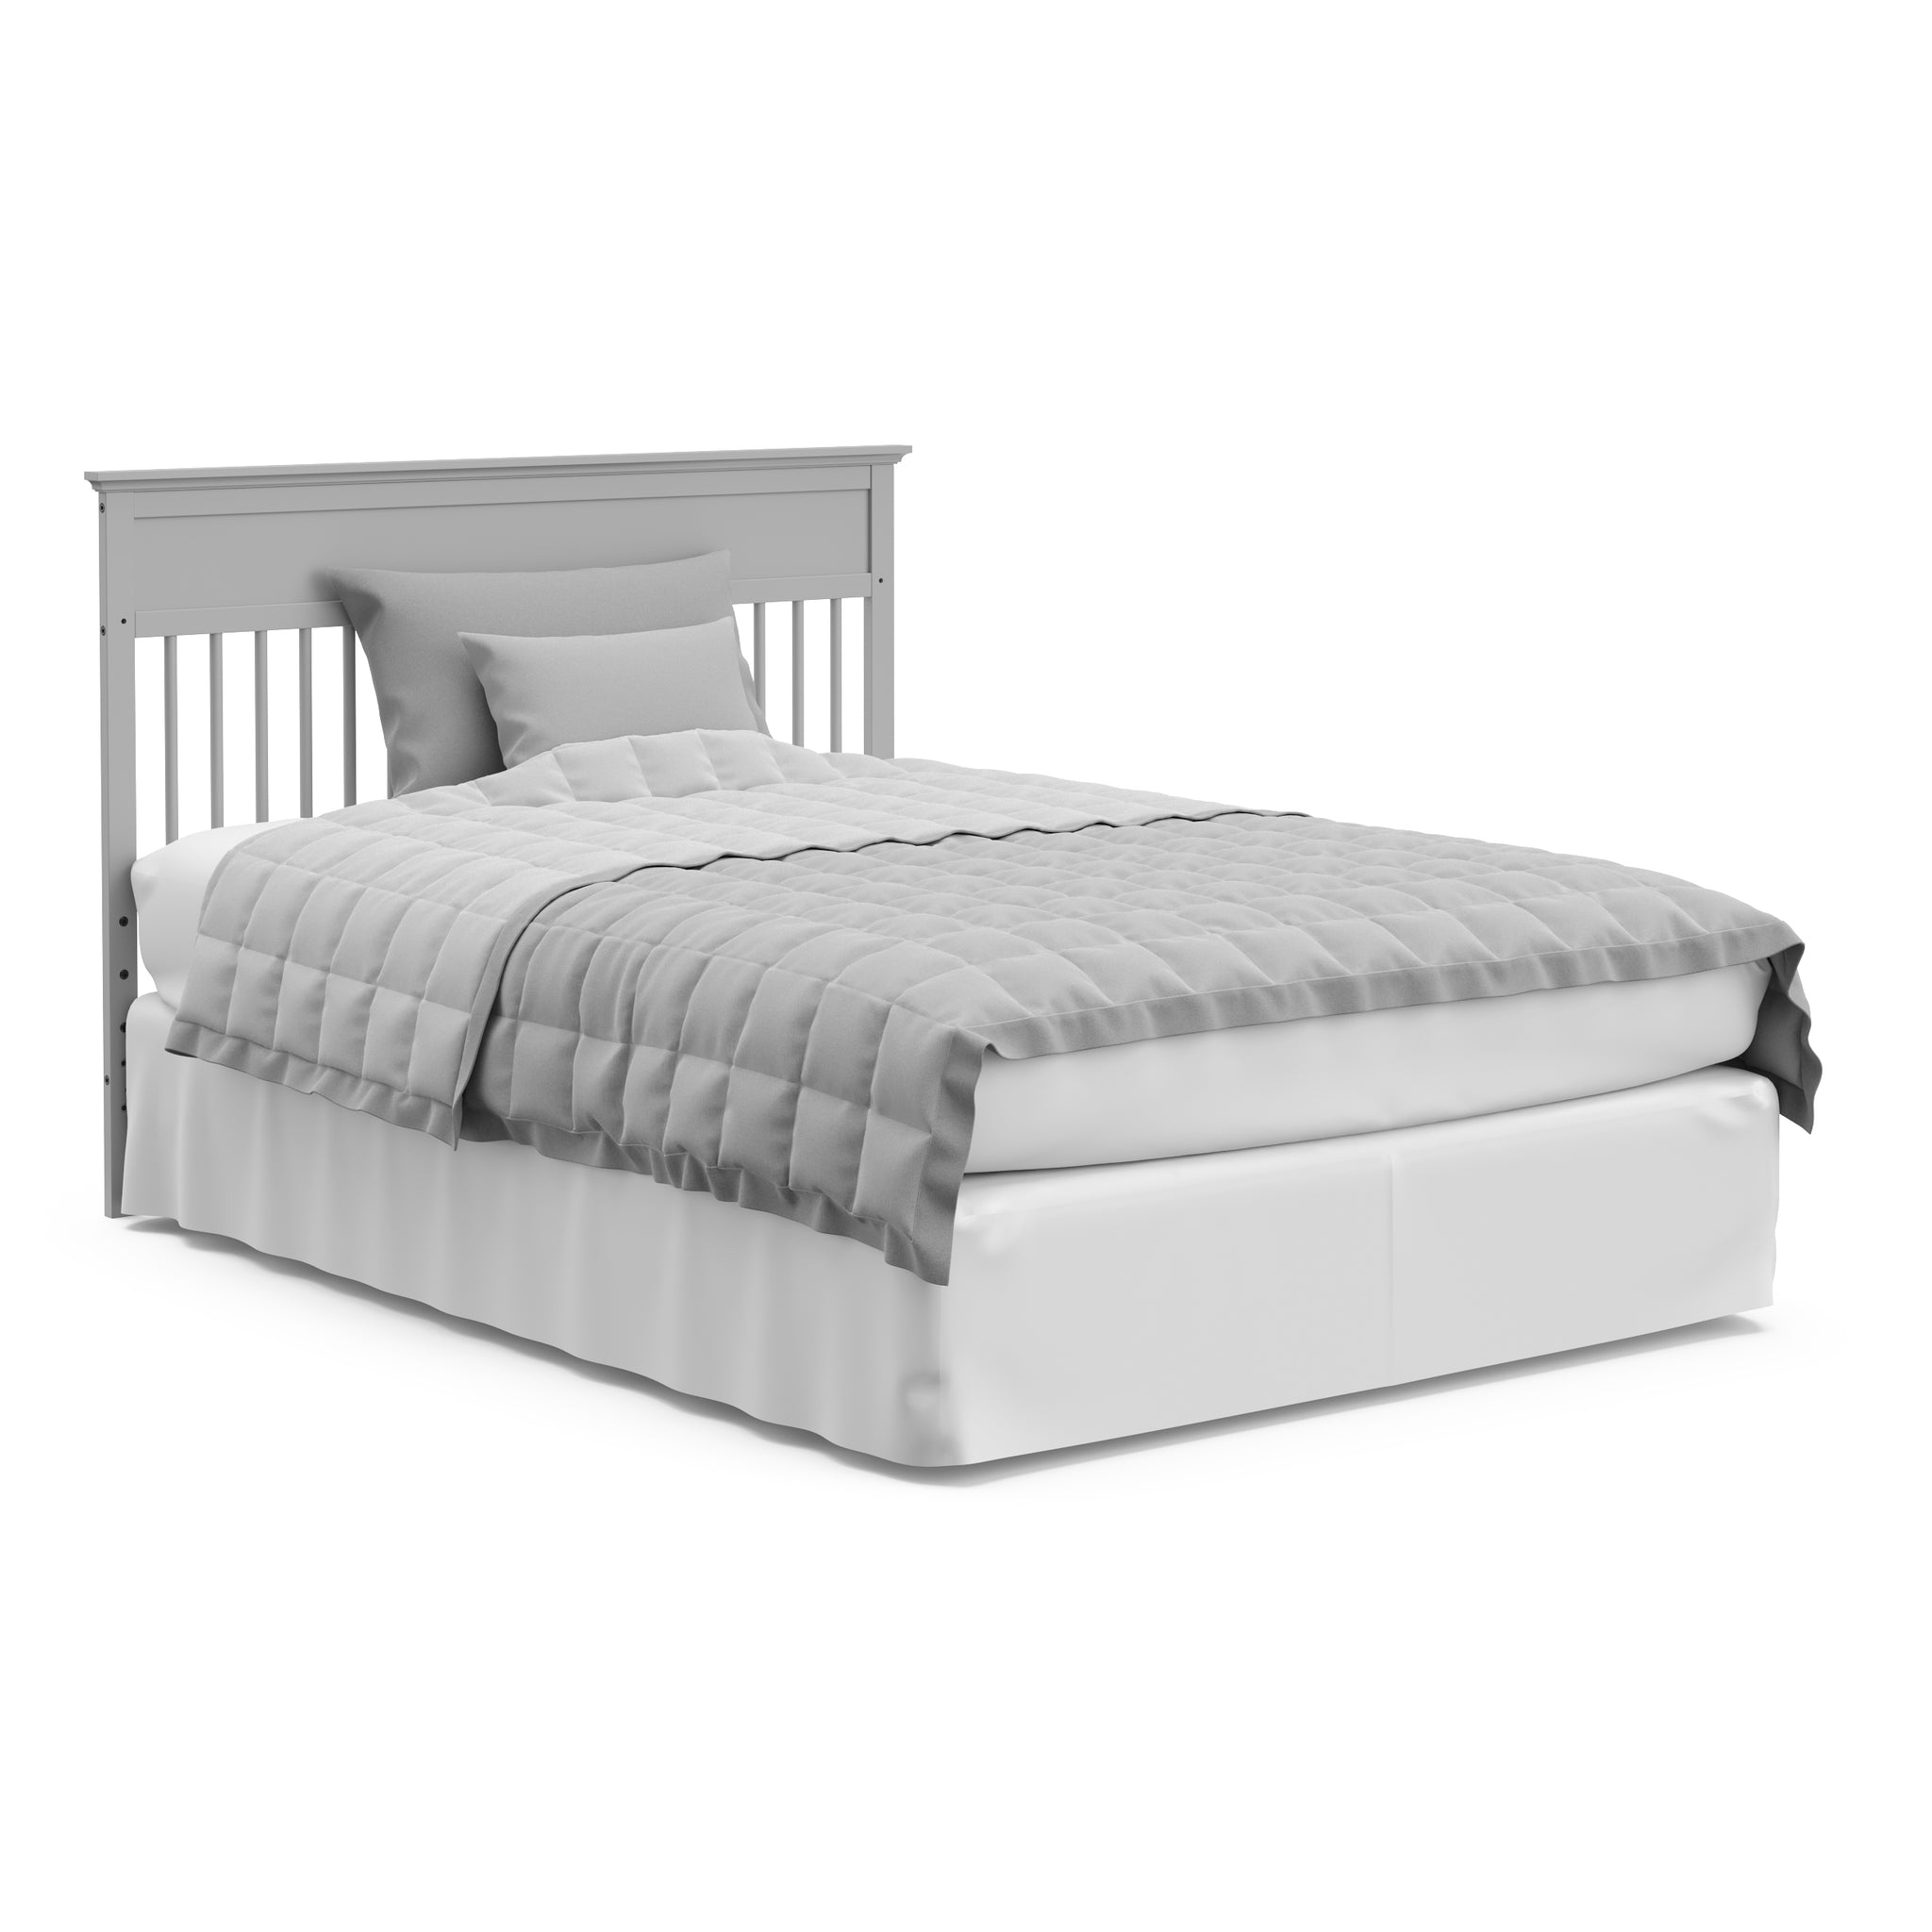 pebble gray crib in full-size bed with headboard conversion